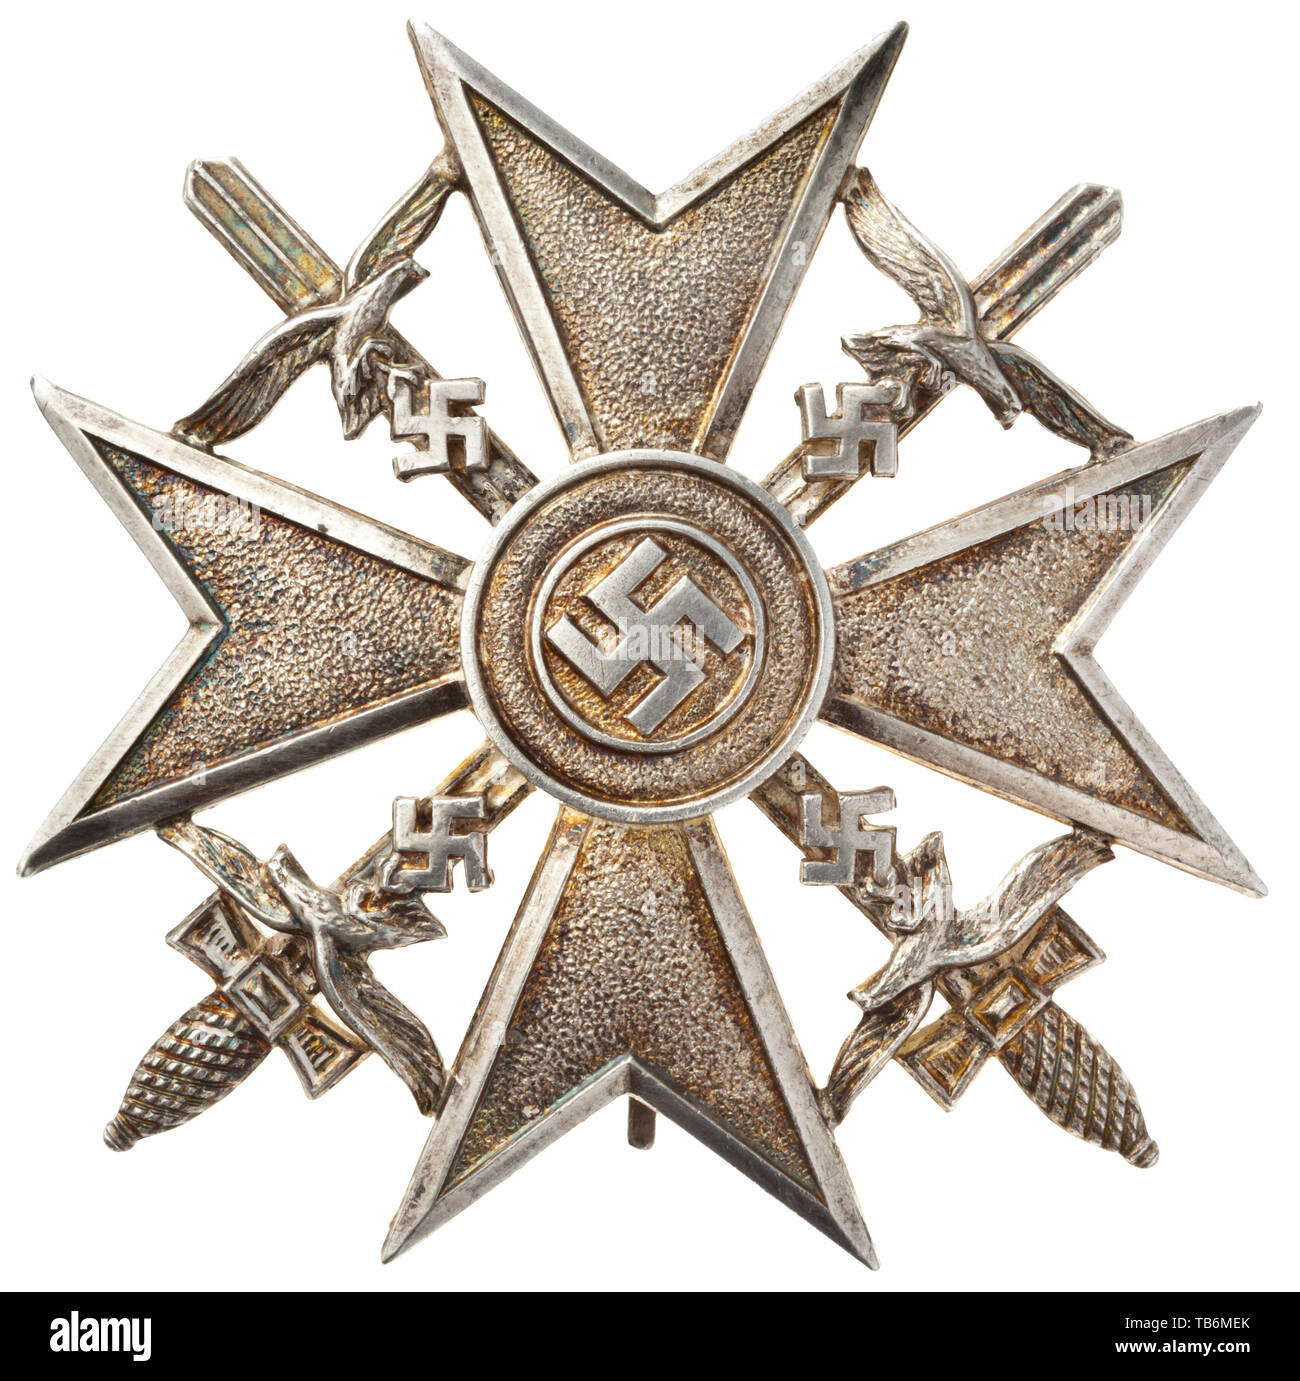 A Spanish Cross in Silver with Swords, Convex cross and swords struck in silver, separately soldered Luftwaffe eagles and superimposed medallion. Fine production quality with polished edges and curved attachment pin on a massive hinge. Made by the Meybauer firm or Juncker in the first awards series of 1939 with reverse '900' silver punch. Width 56.7 mm. Weight 37.1 g. 20th century, 1930s, 1940s, awards, award, German Reich, Third Reich, Nazi era, National Socialism, object, objects, stills, medal, decoration, medals, decorations, clipping, cut out, cut-out, cut-outs, honor,, Editorial-Use-Only Stock Photo